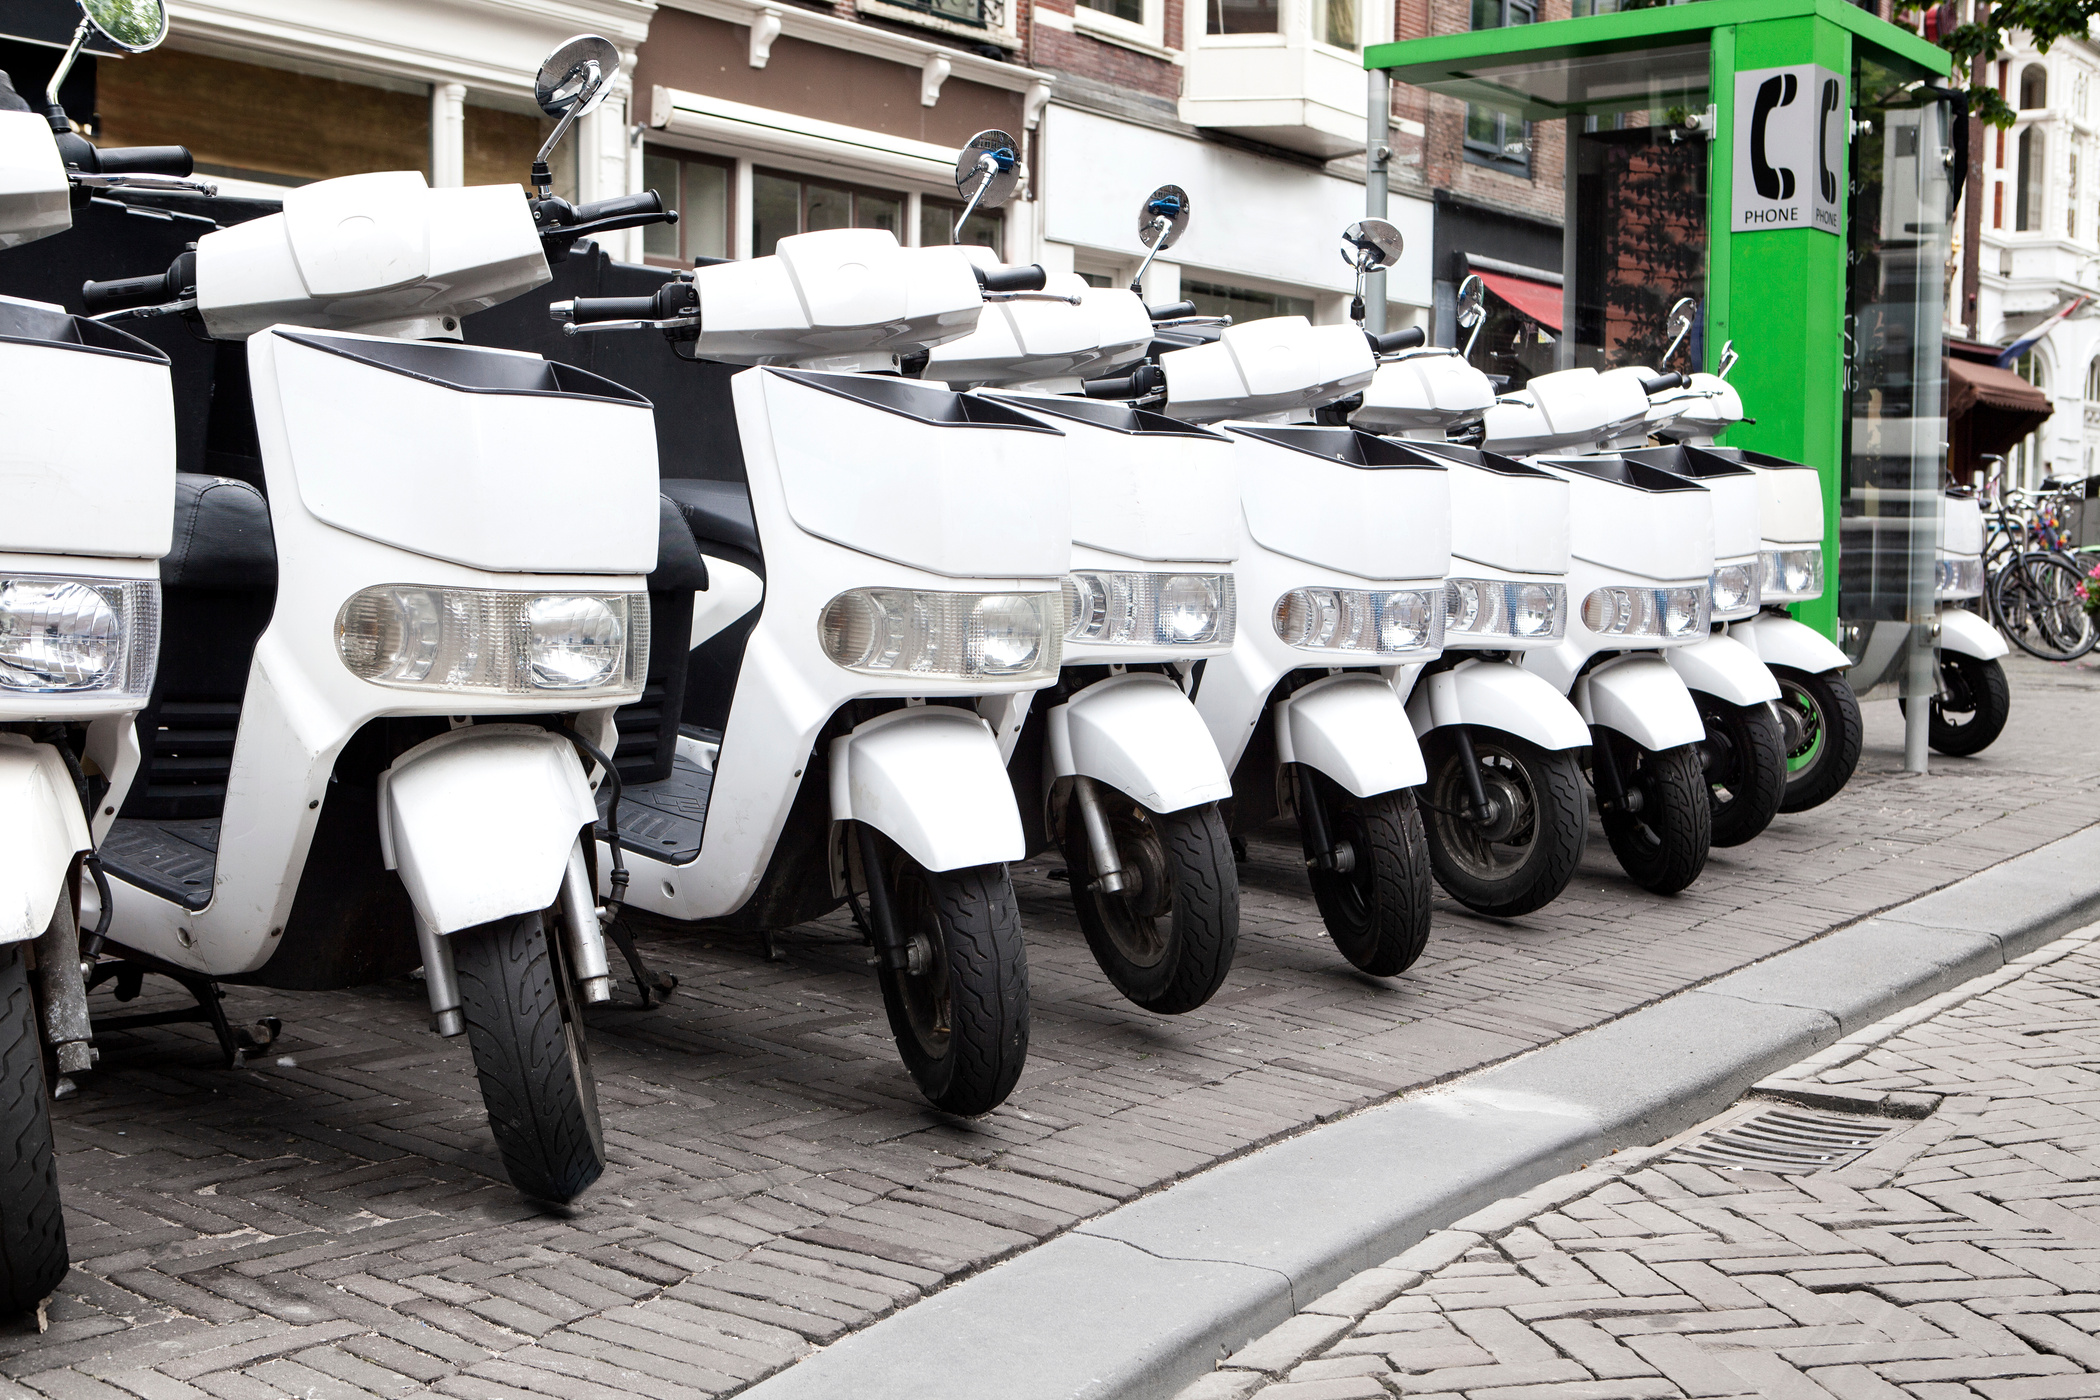 Row of motor scooters